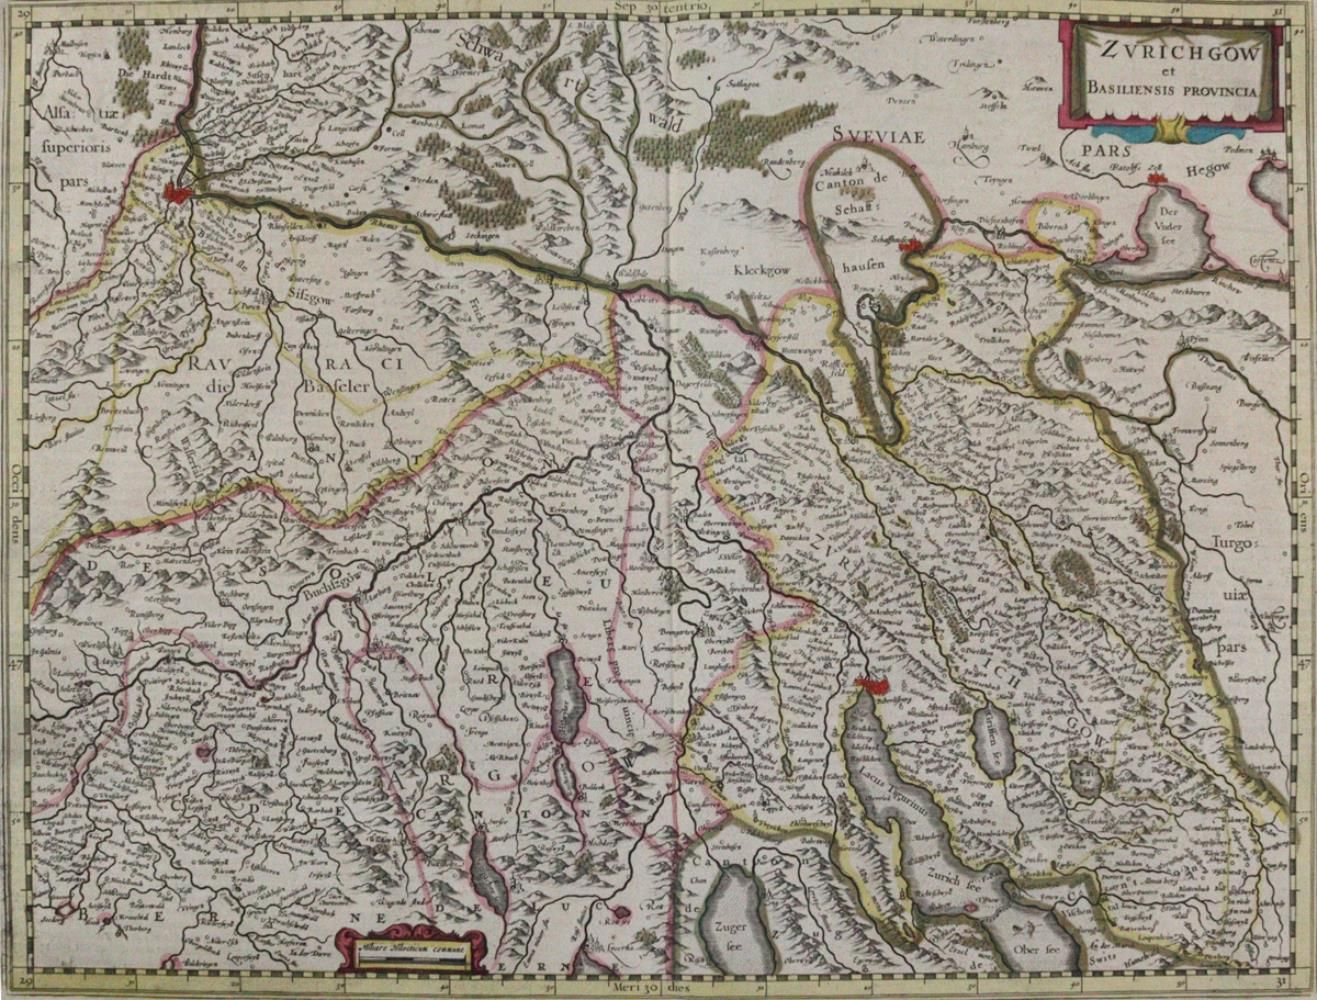 Zürich. "Zurichgow et Basiliensis provincia". Old col. Copper engraved map with &hellip;